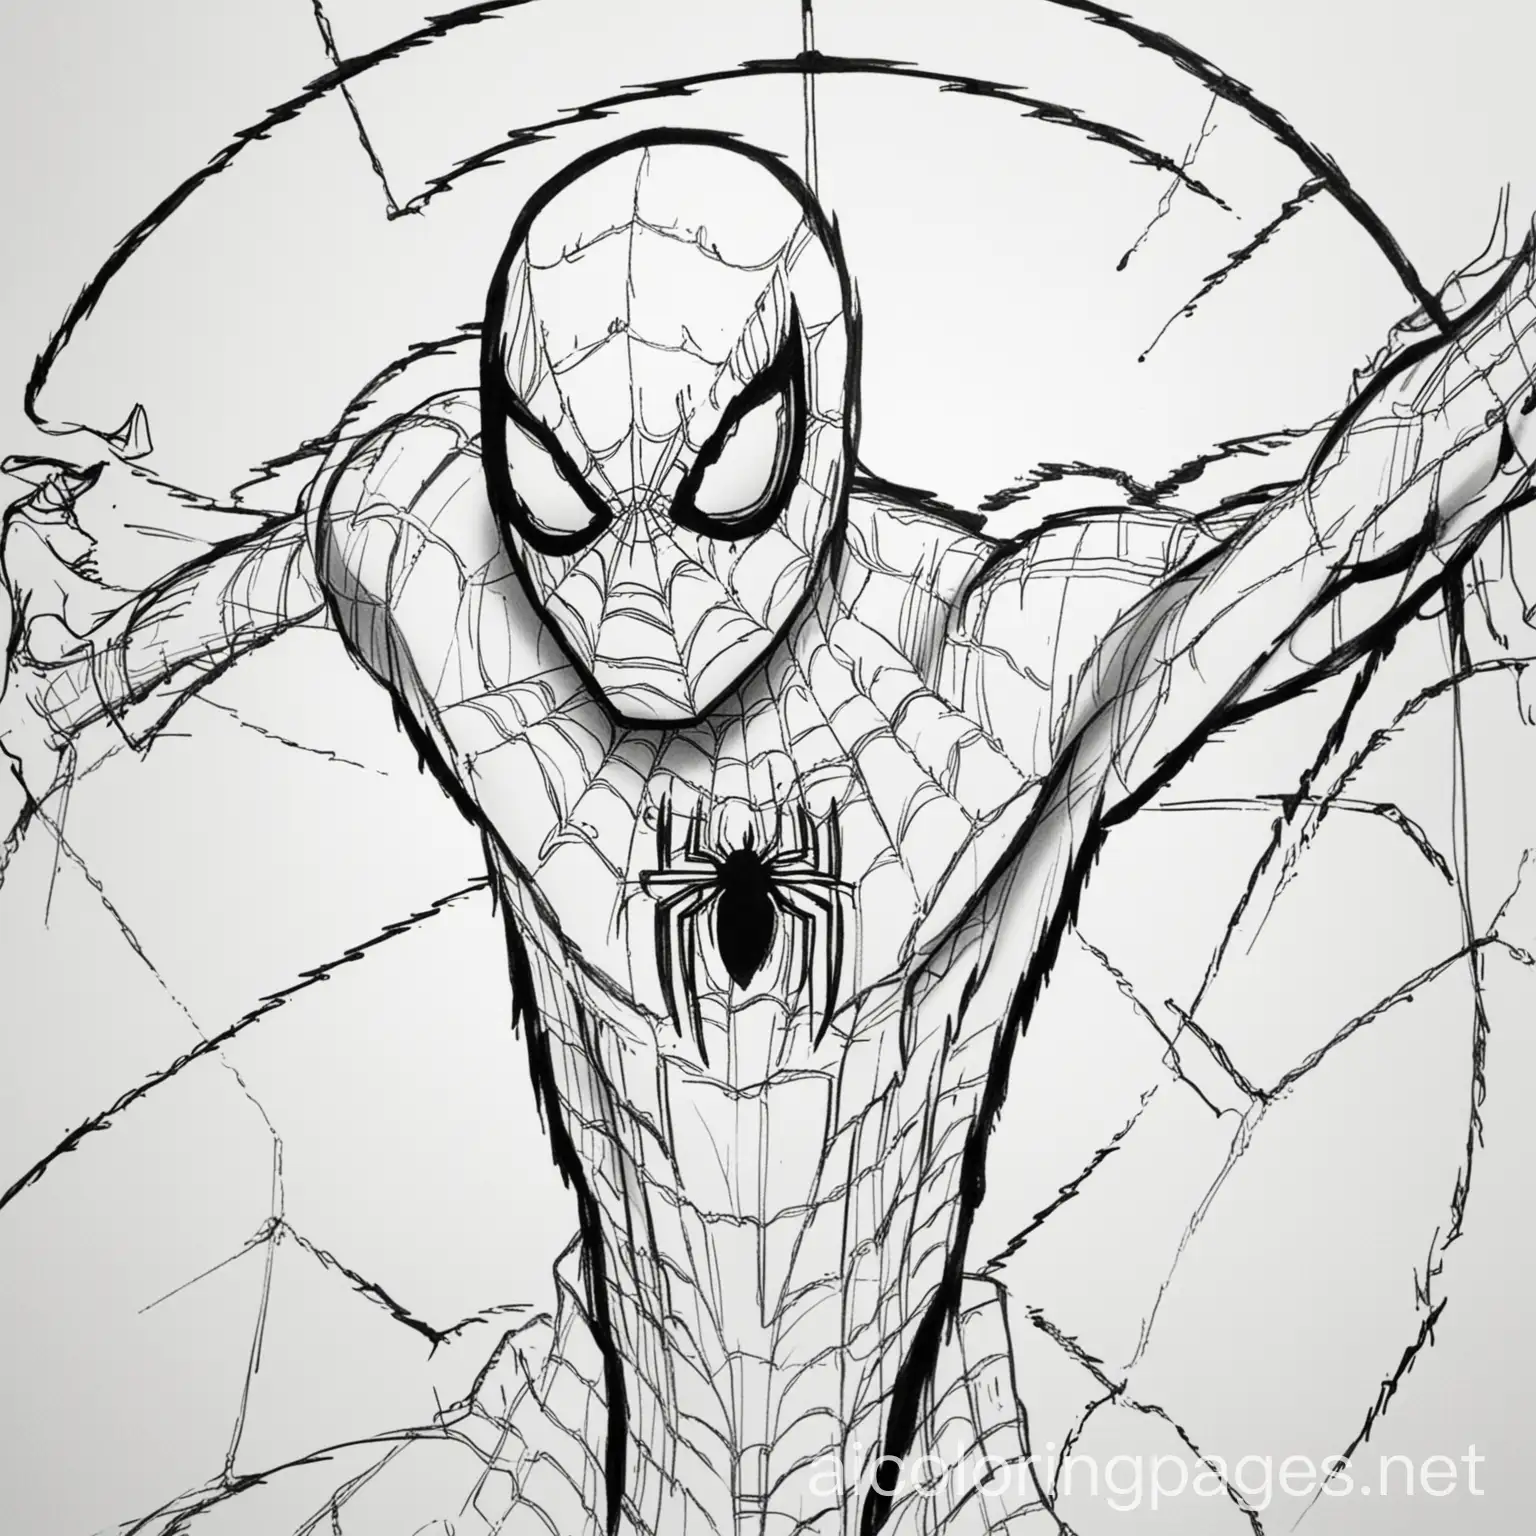 spider man, Coloring Page, black and white, line art, white background, Simplicity, Ample White Space. The background of the coloring page is plain white to make it easy for young children to color within the lines. The outlines of all the subjects are easy to distinguish, making it simple for kids to color without too much difficulty